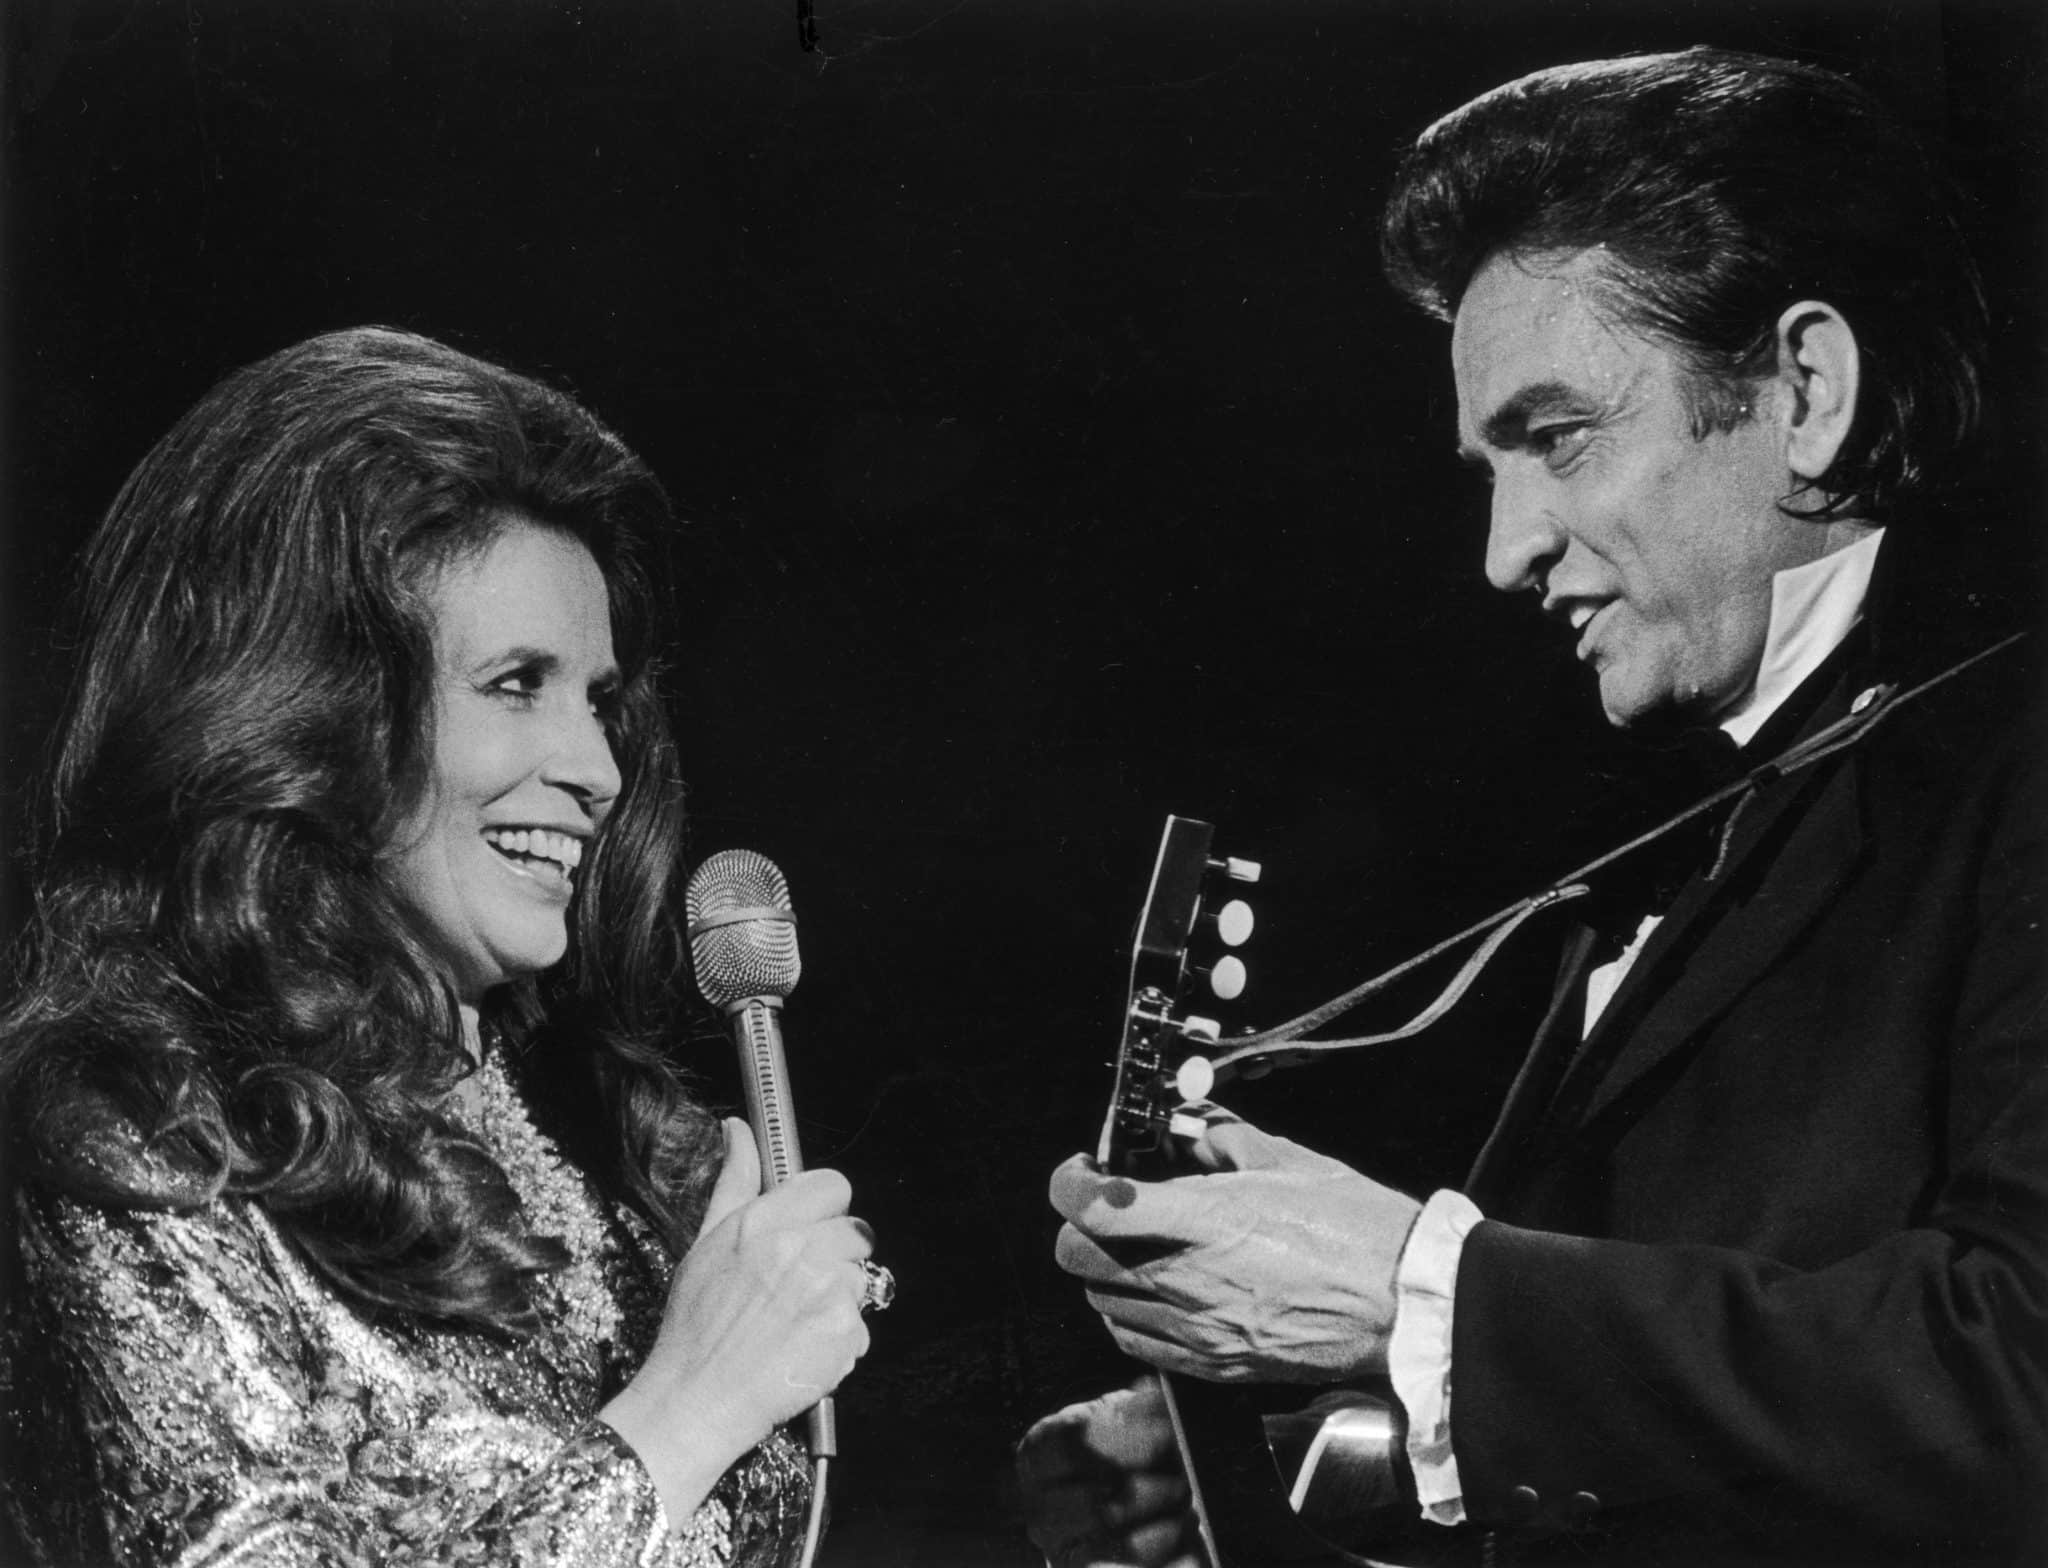 Two sets of parents in Alabama coincidentally named their babies Johnny Cash and June Carter like the country music legends